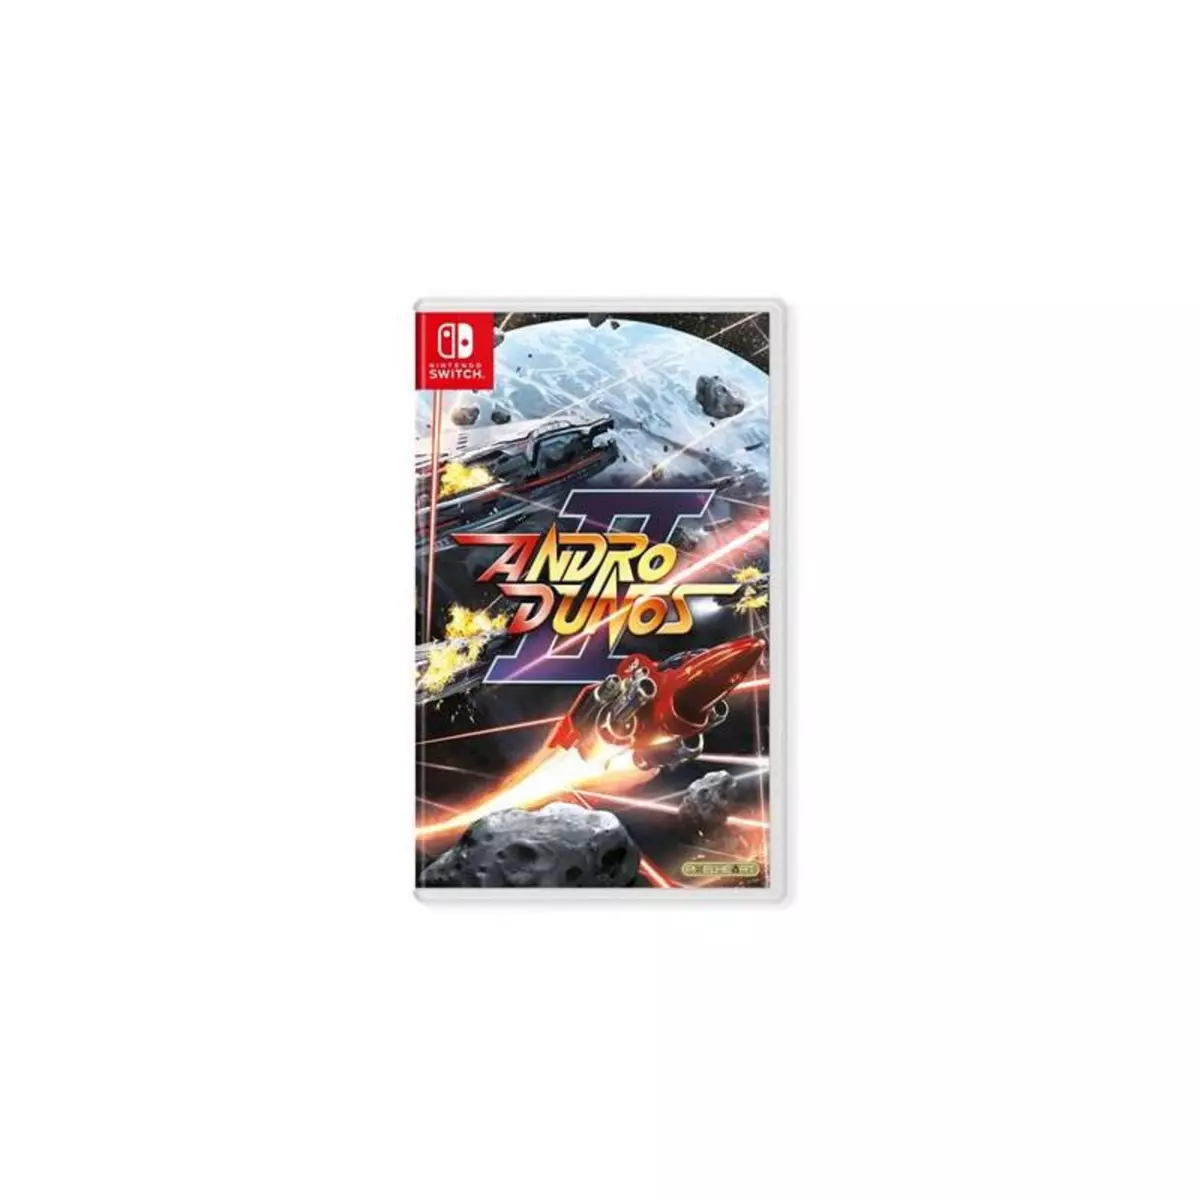 Just for games Andro Dunos 2 MVS Edition Nintendo Switch